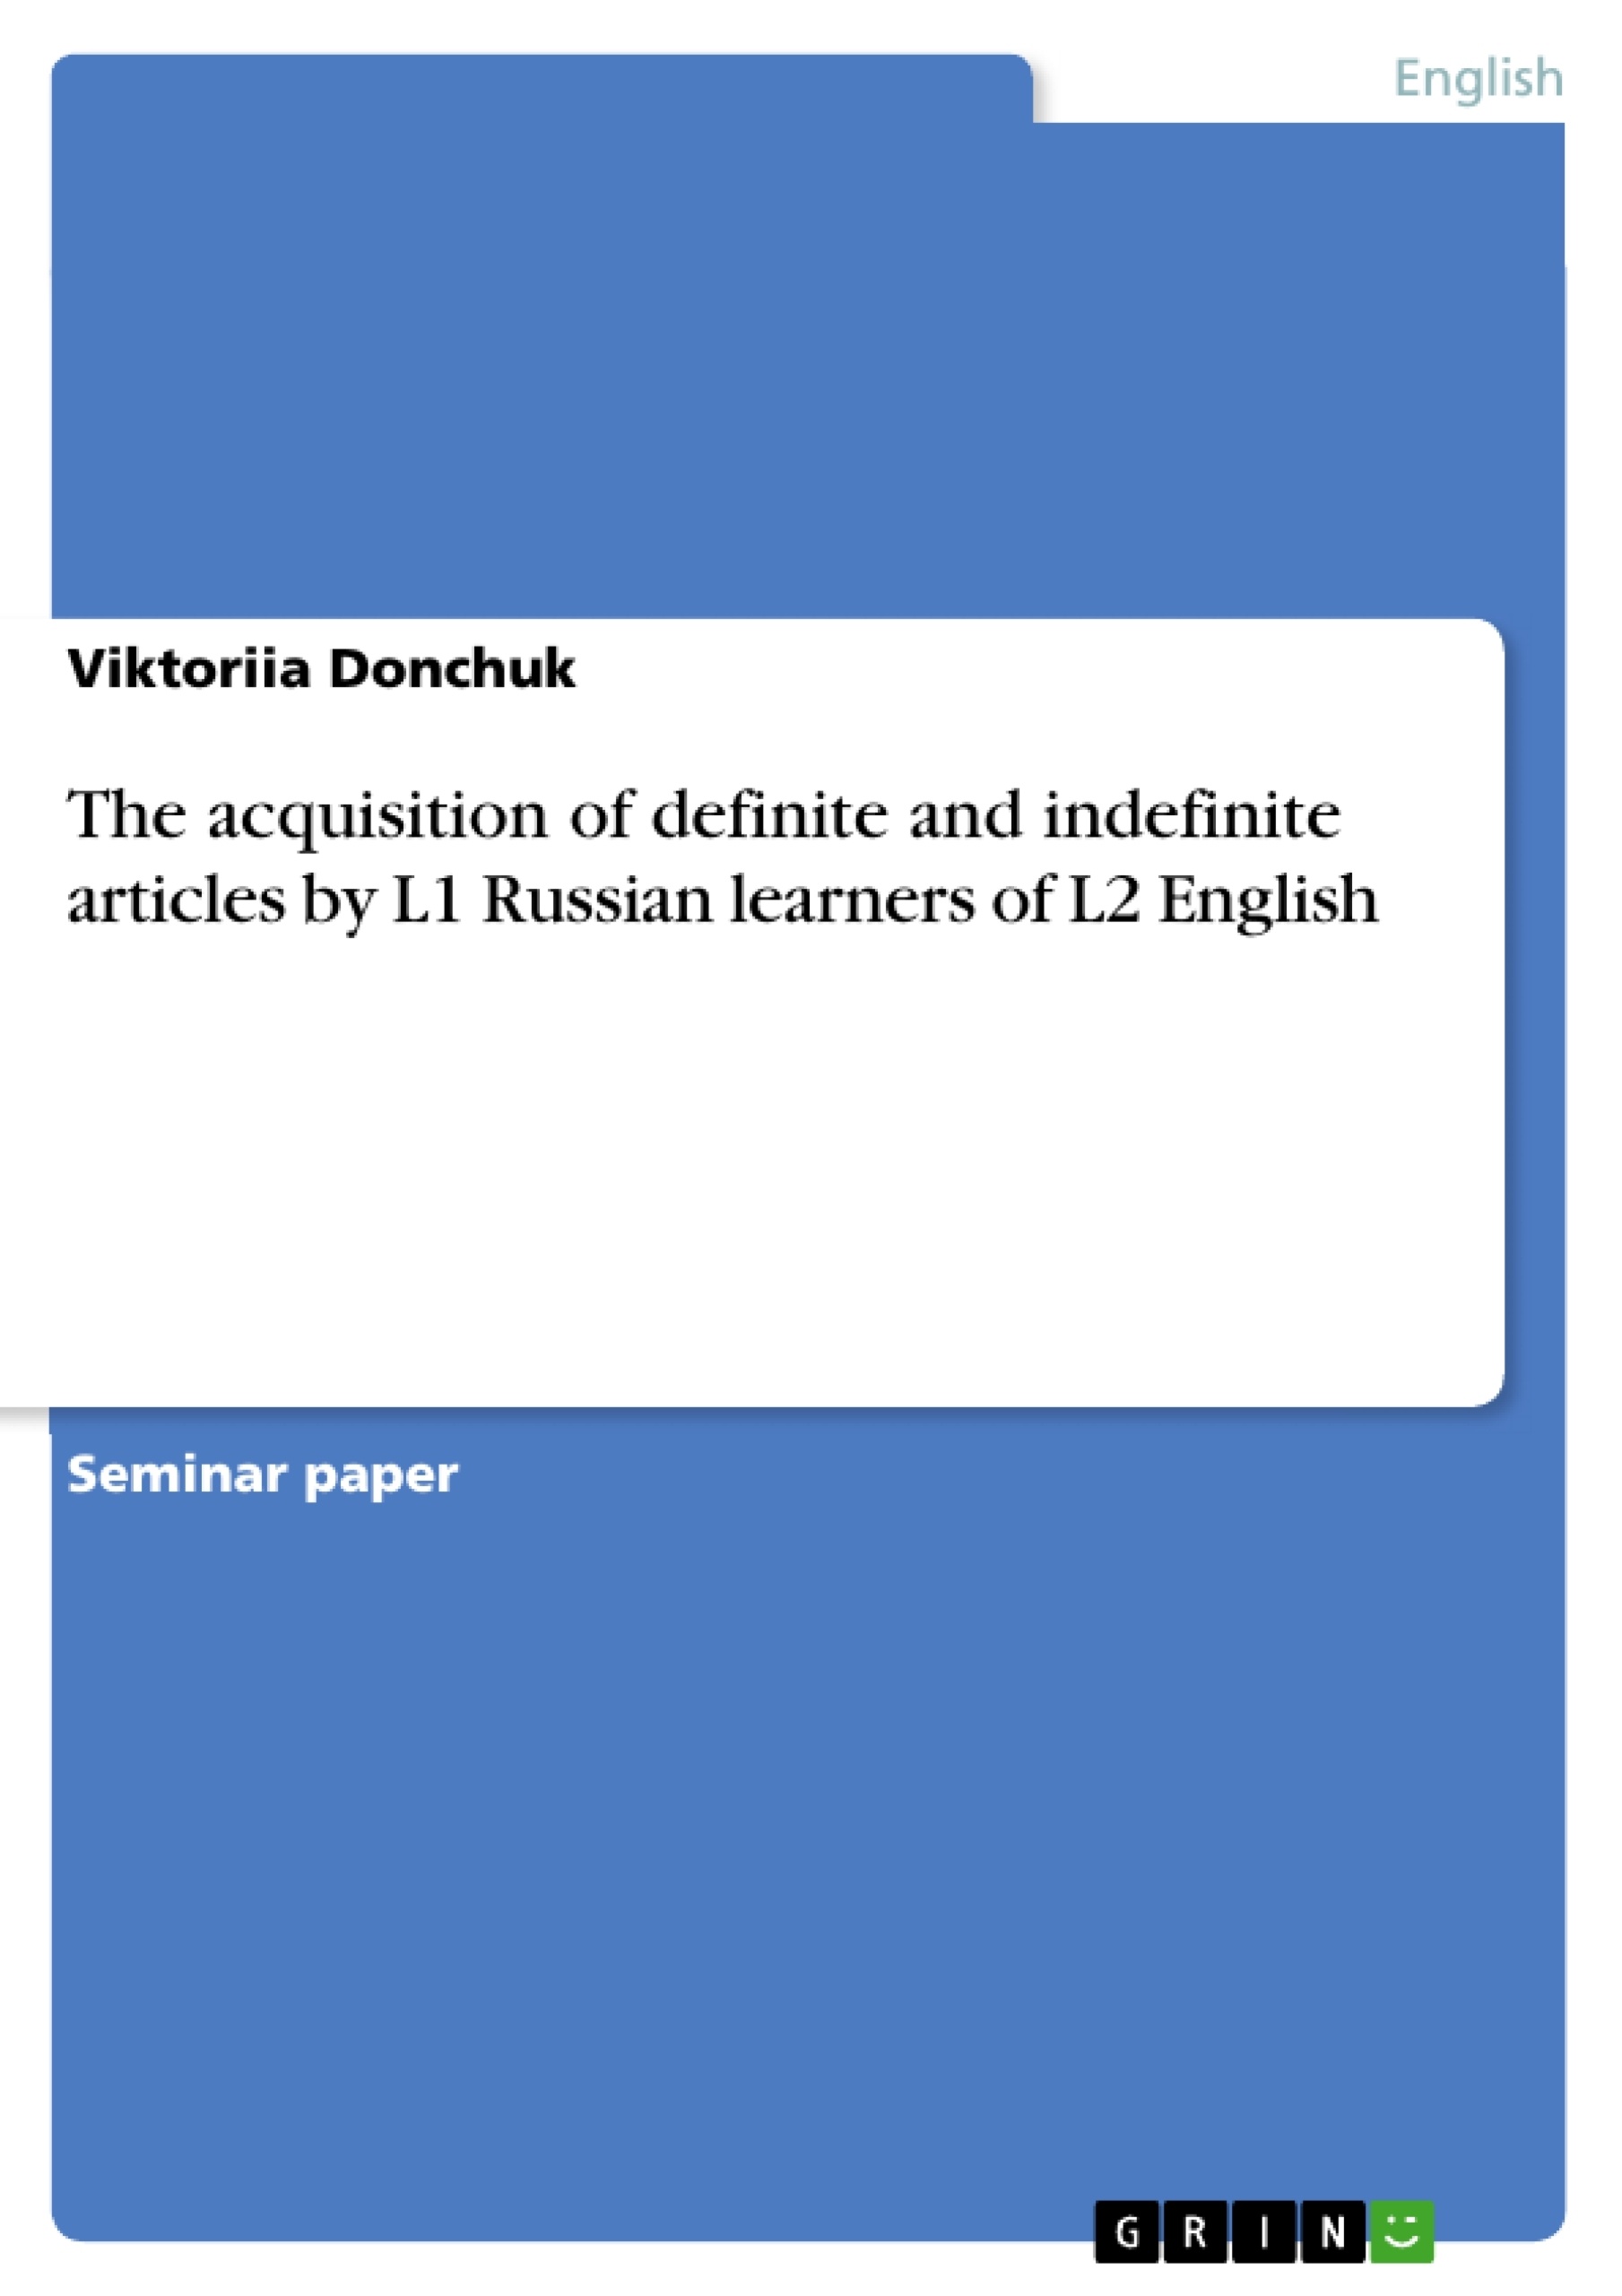 Título: The acquisition of definite and indefinite articles by L1 Russian learners of L2 English